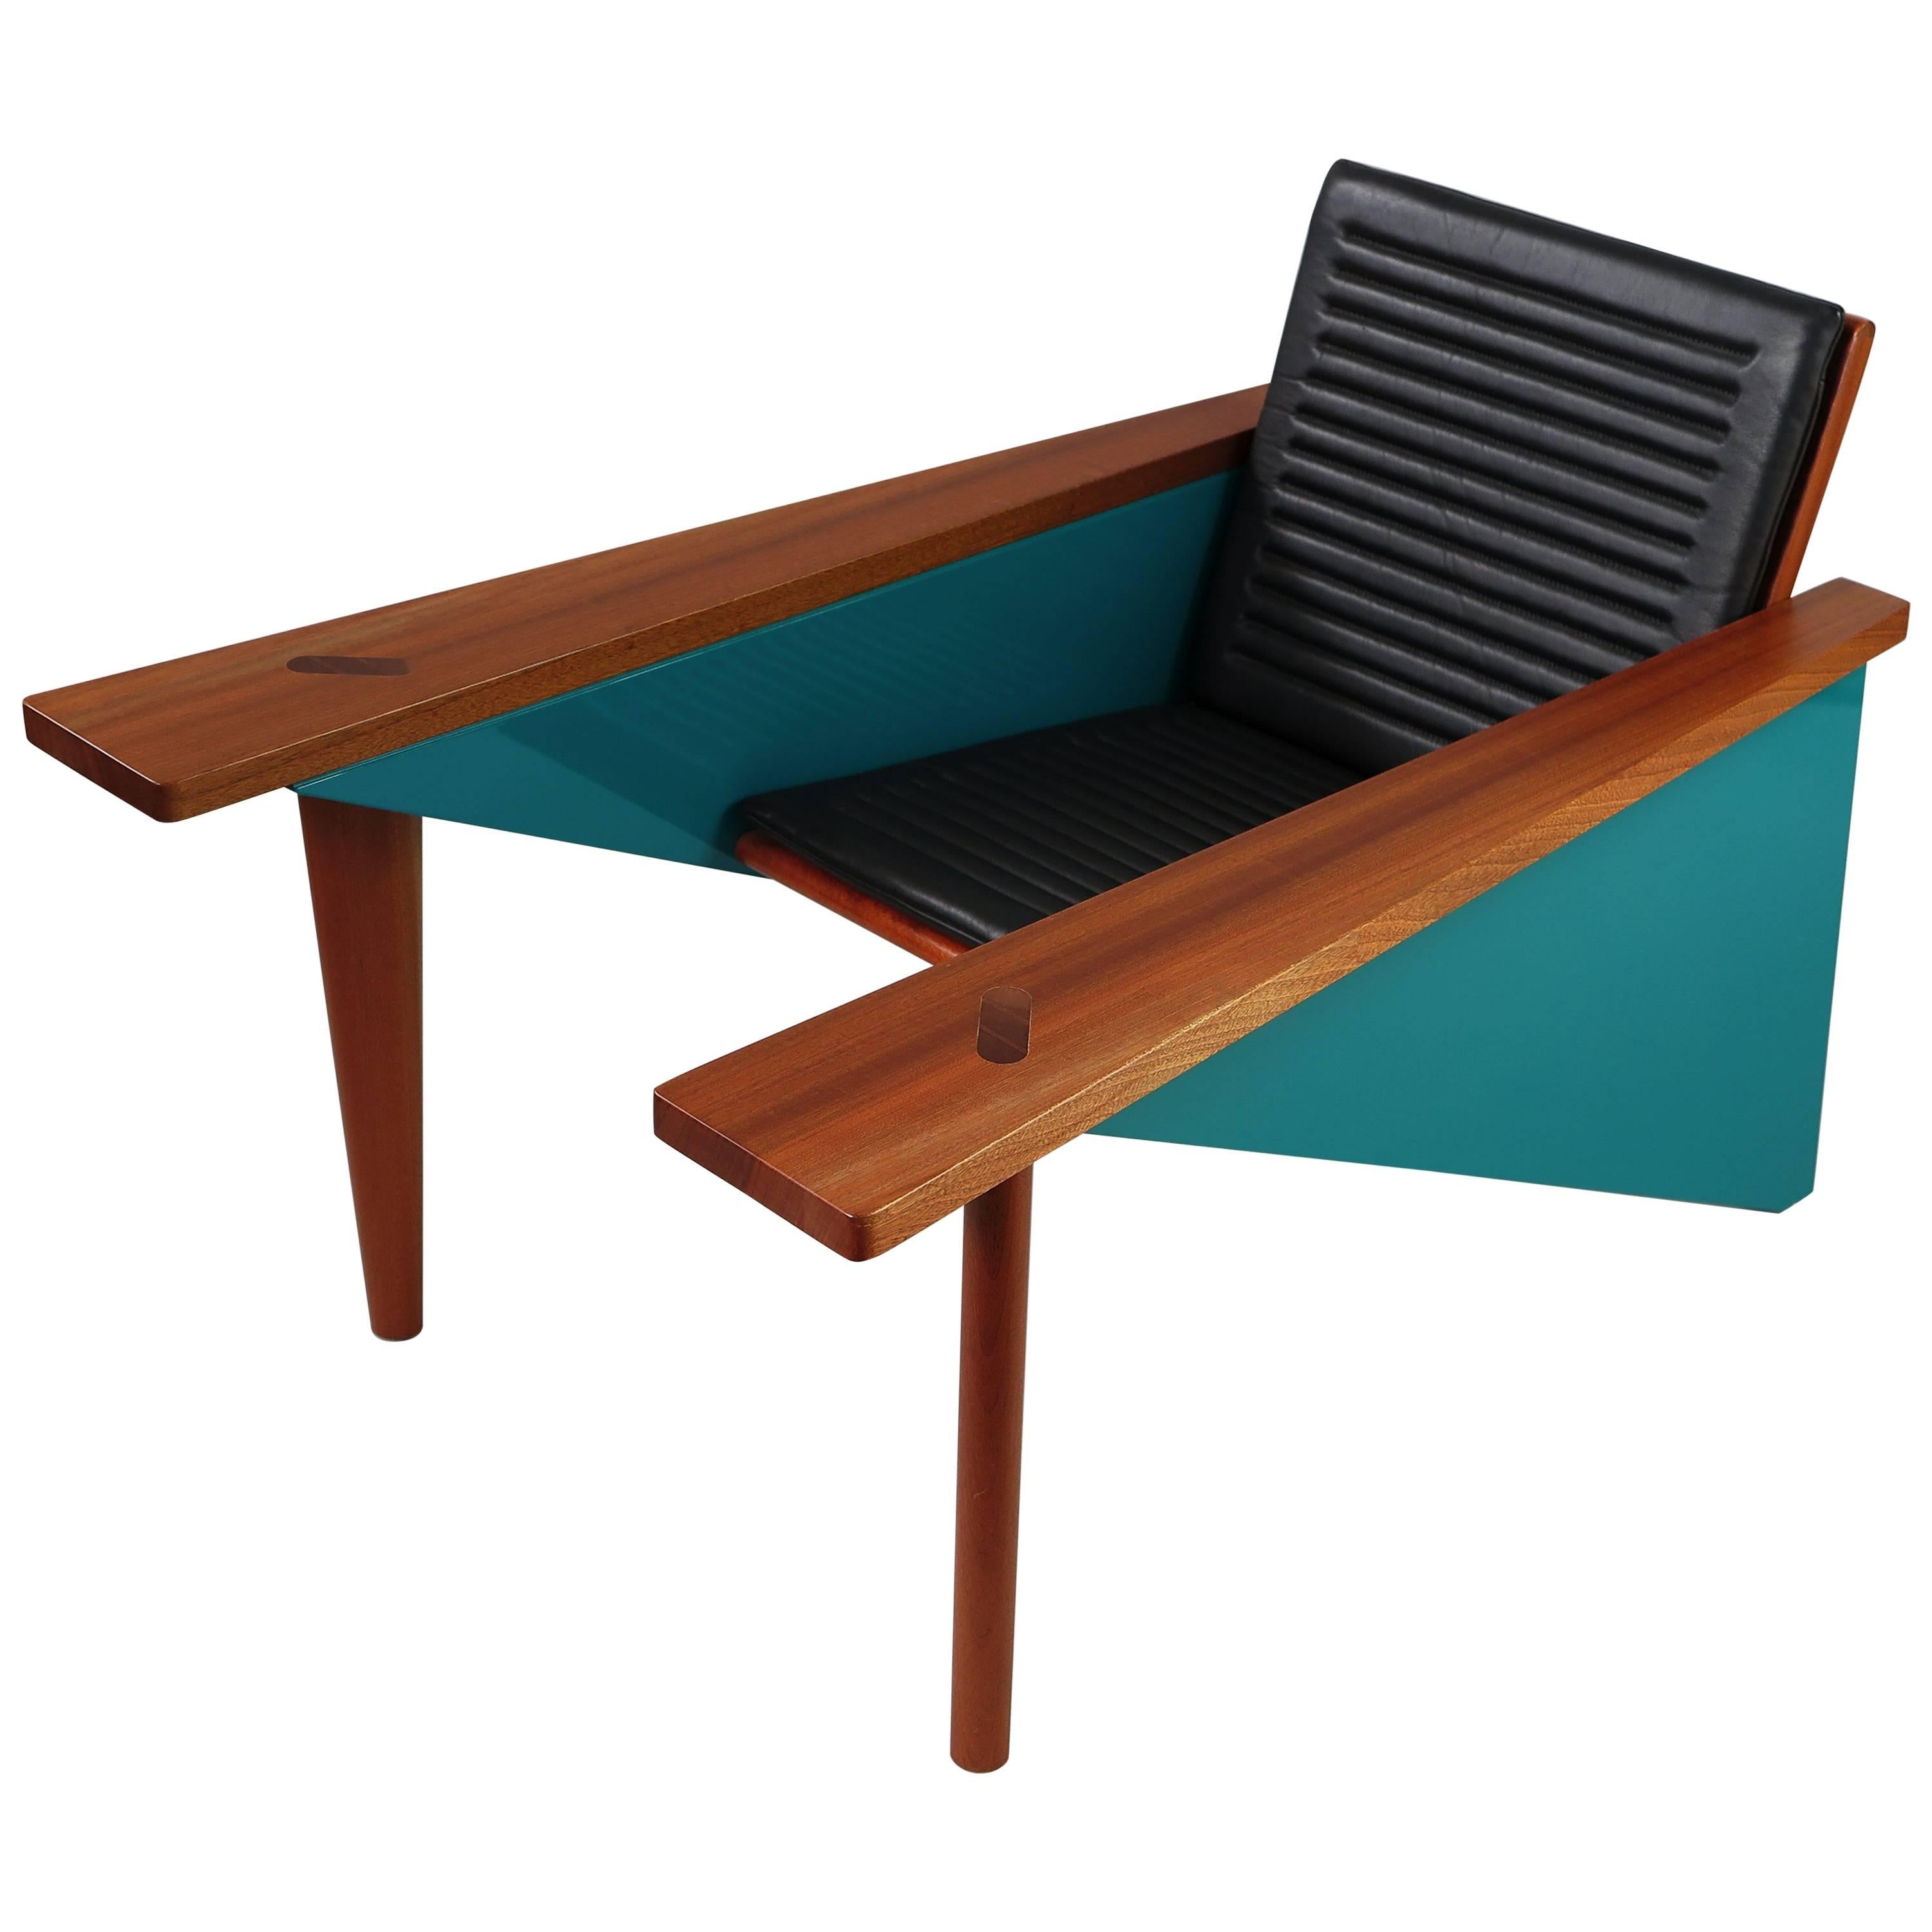 Stefan Zwicky's Iconic Lounge Chair, Switzerland, 1980s For Sale